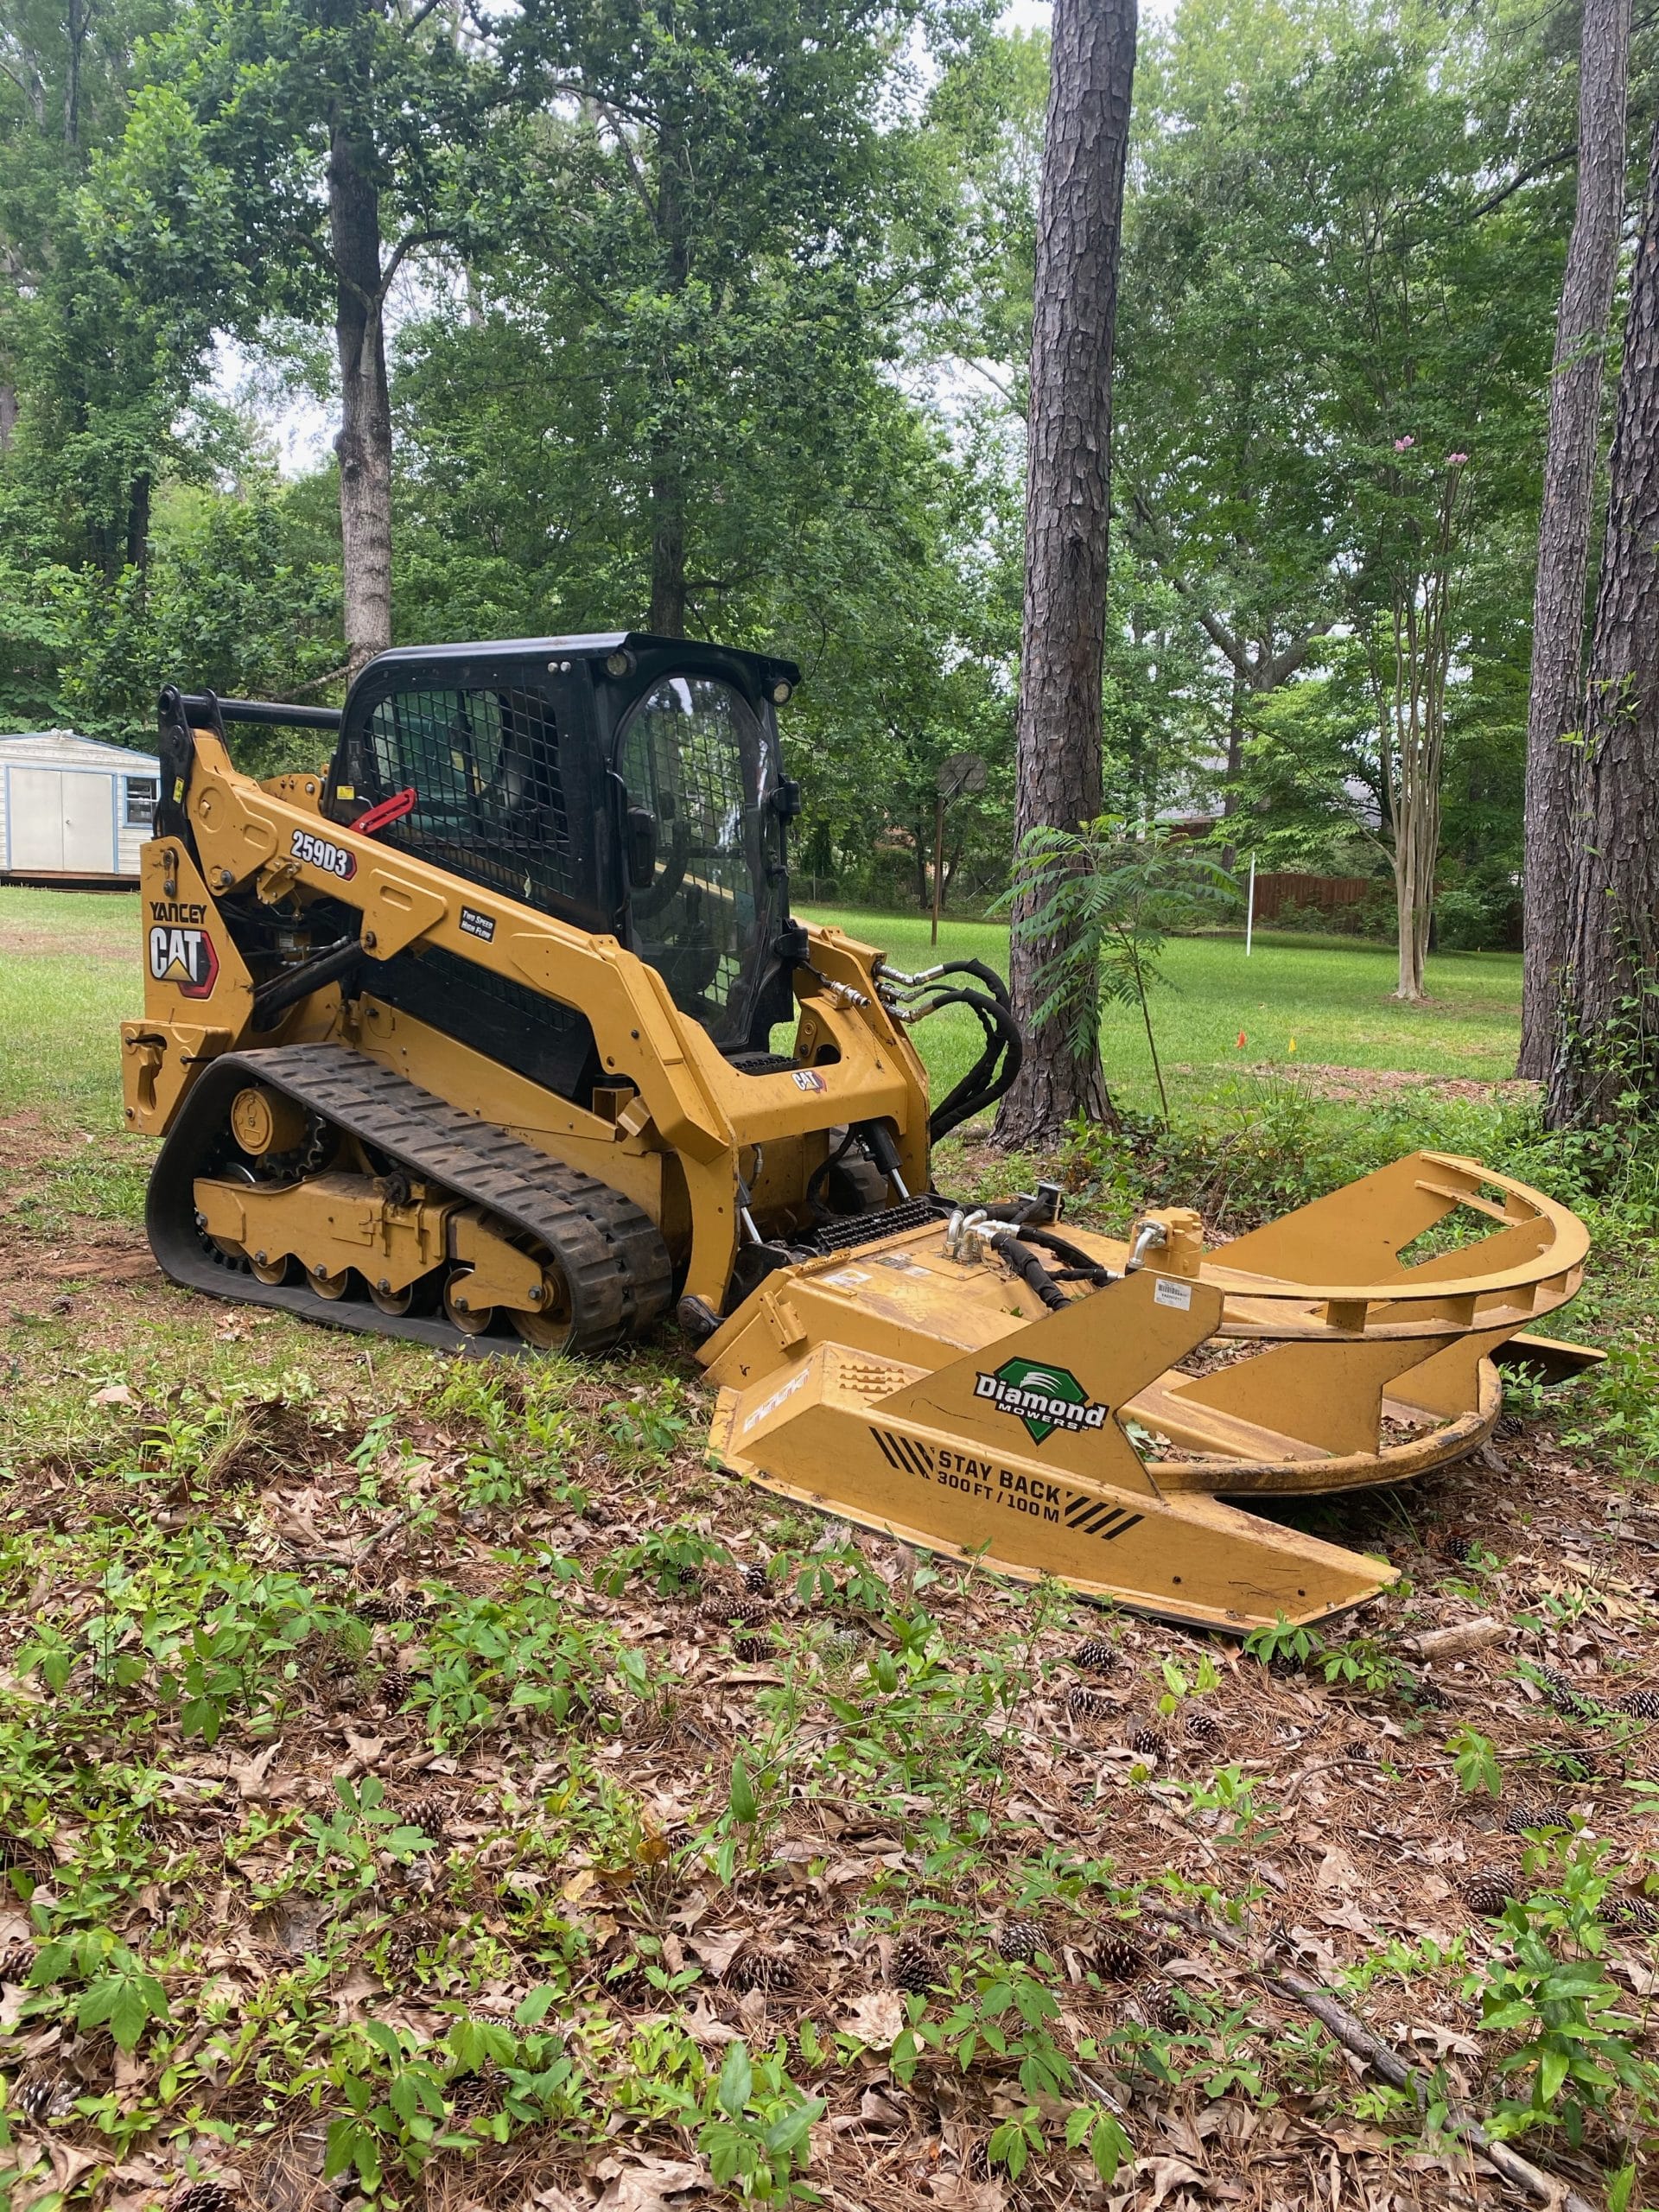 Skid steer with brush cutting attachment